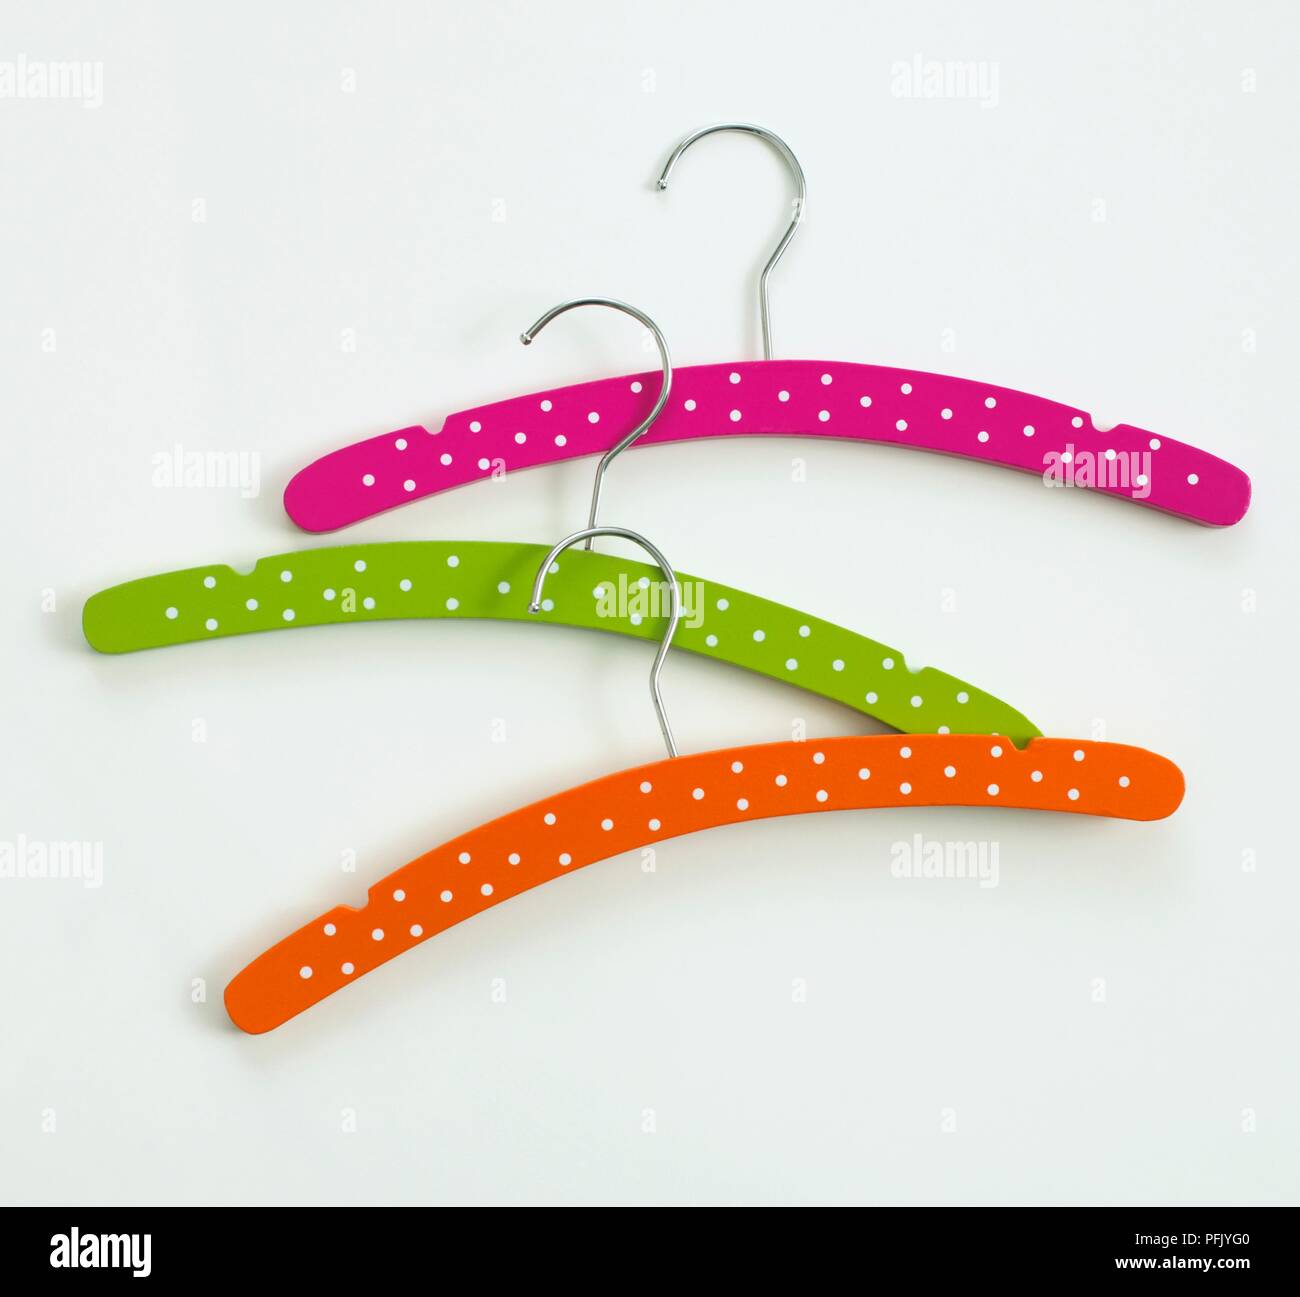 Three multi-coloured coat hangers with polka dots on them Stock Photo